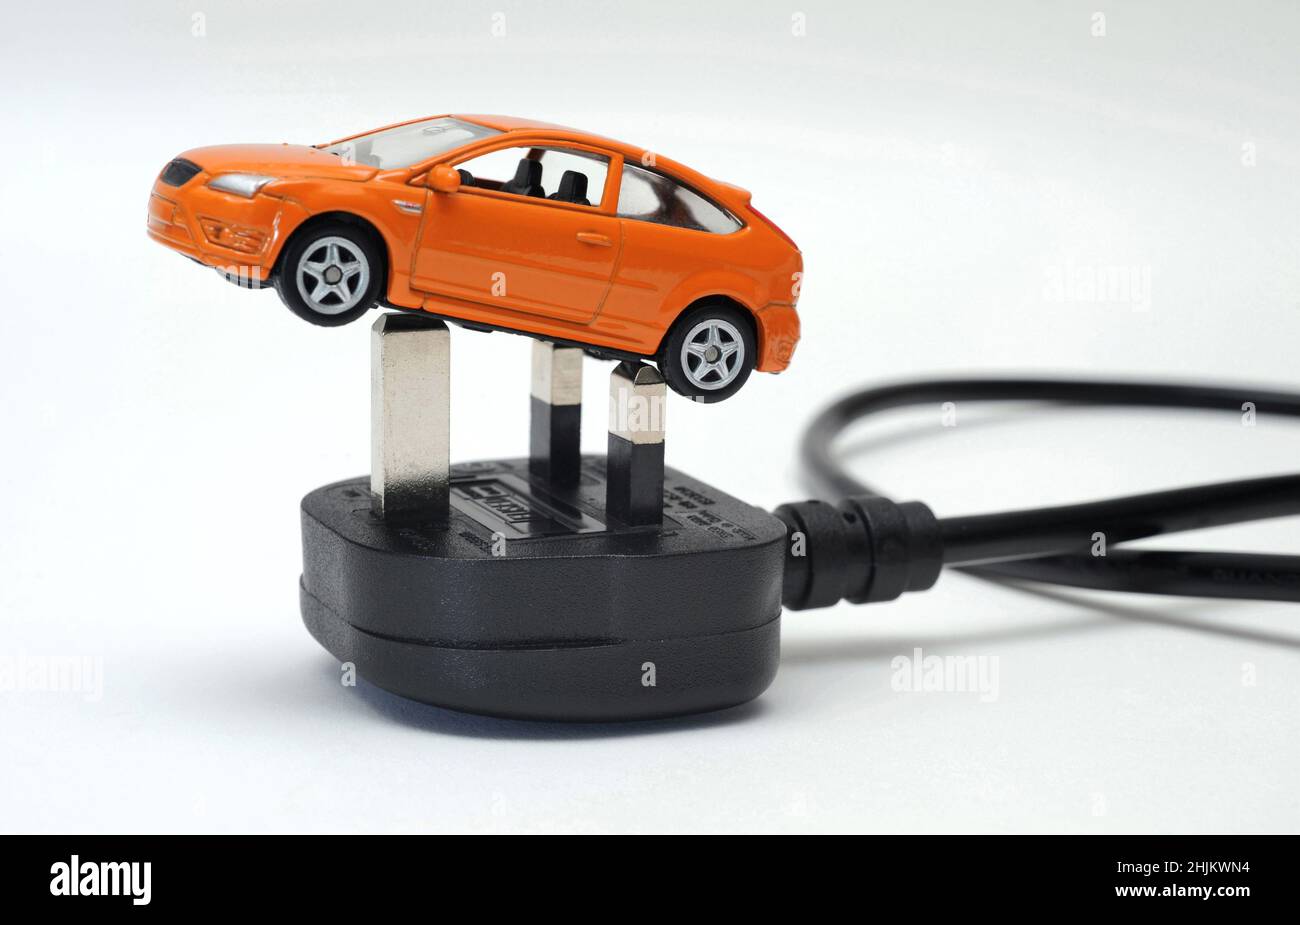 MODEL CAR ON ELECTRIC PLUG AND LEAD RE ELECTRIC CARS VEHICLE EV ZERO EMISSIONS GREEN MOTORING PETROL DIESEL FOSSIL FUEL ETC UK Stock Photo